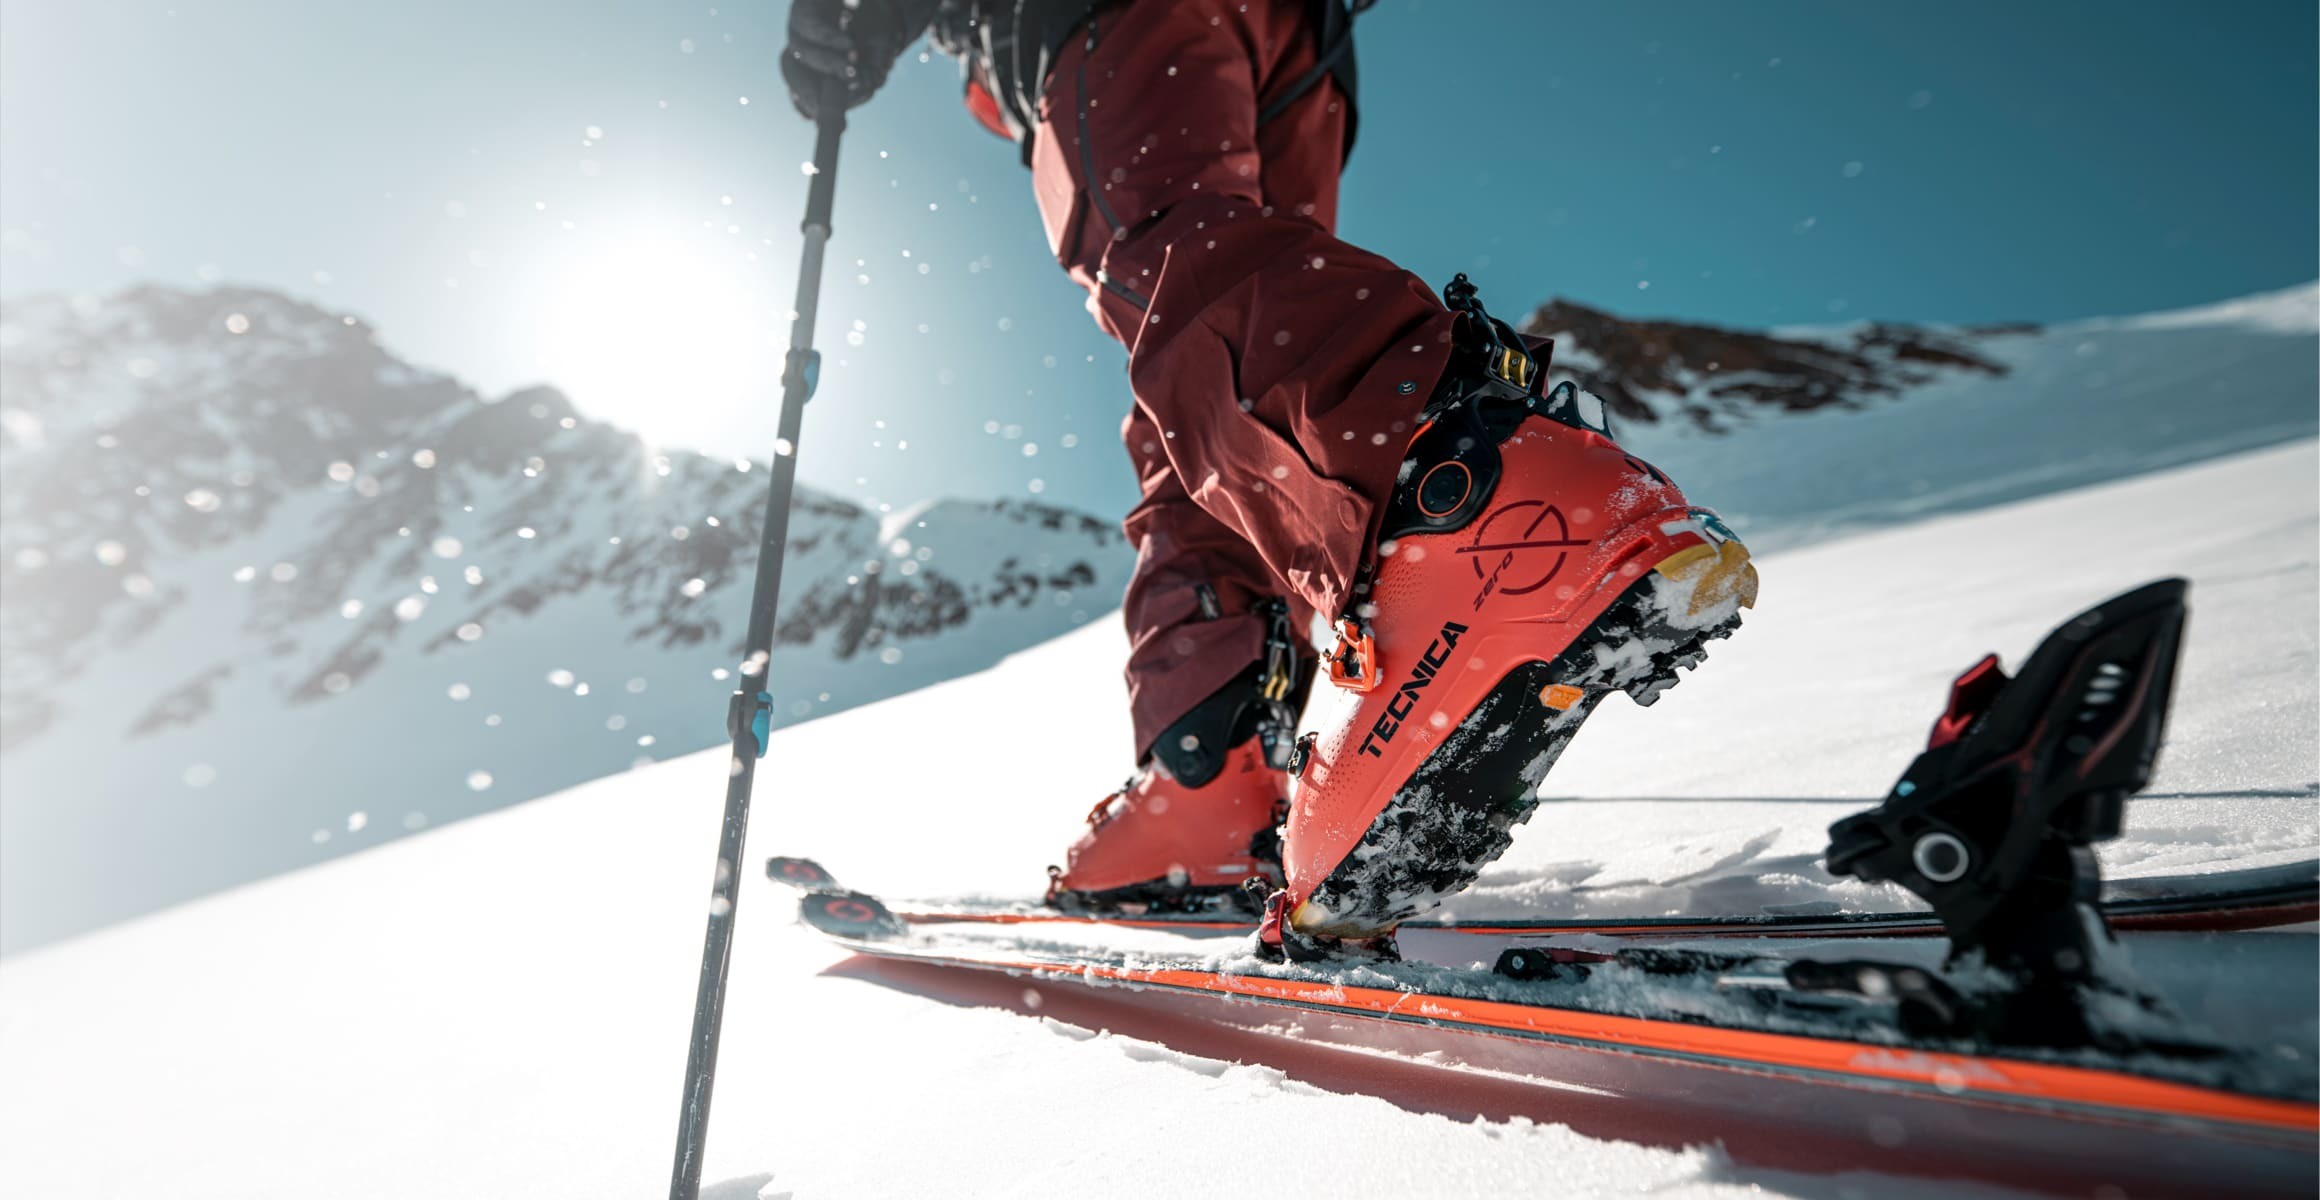 What is ski touring?